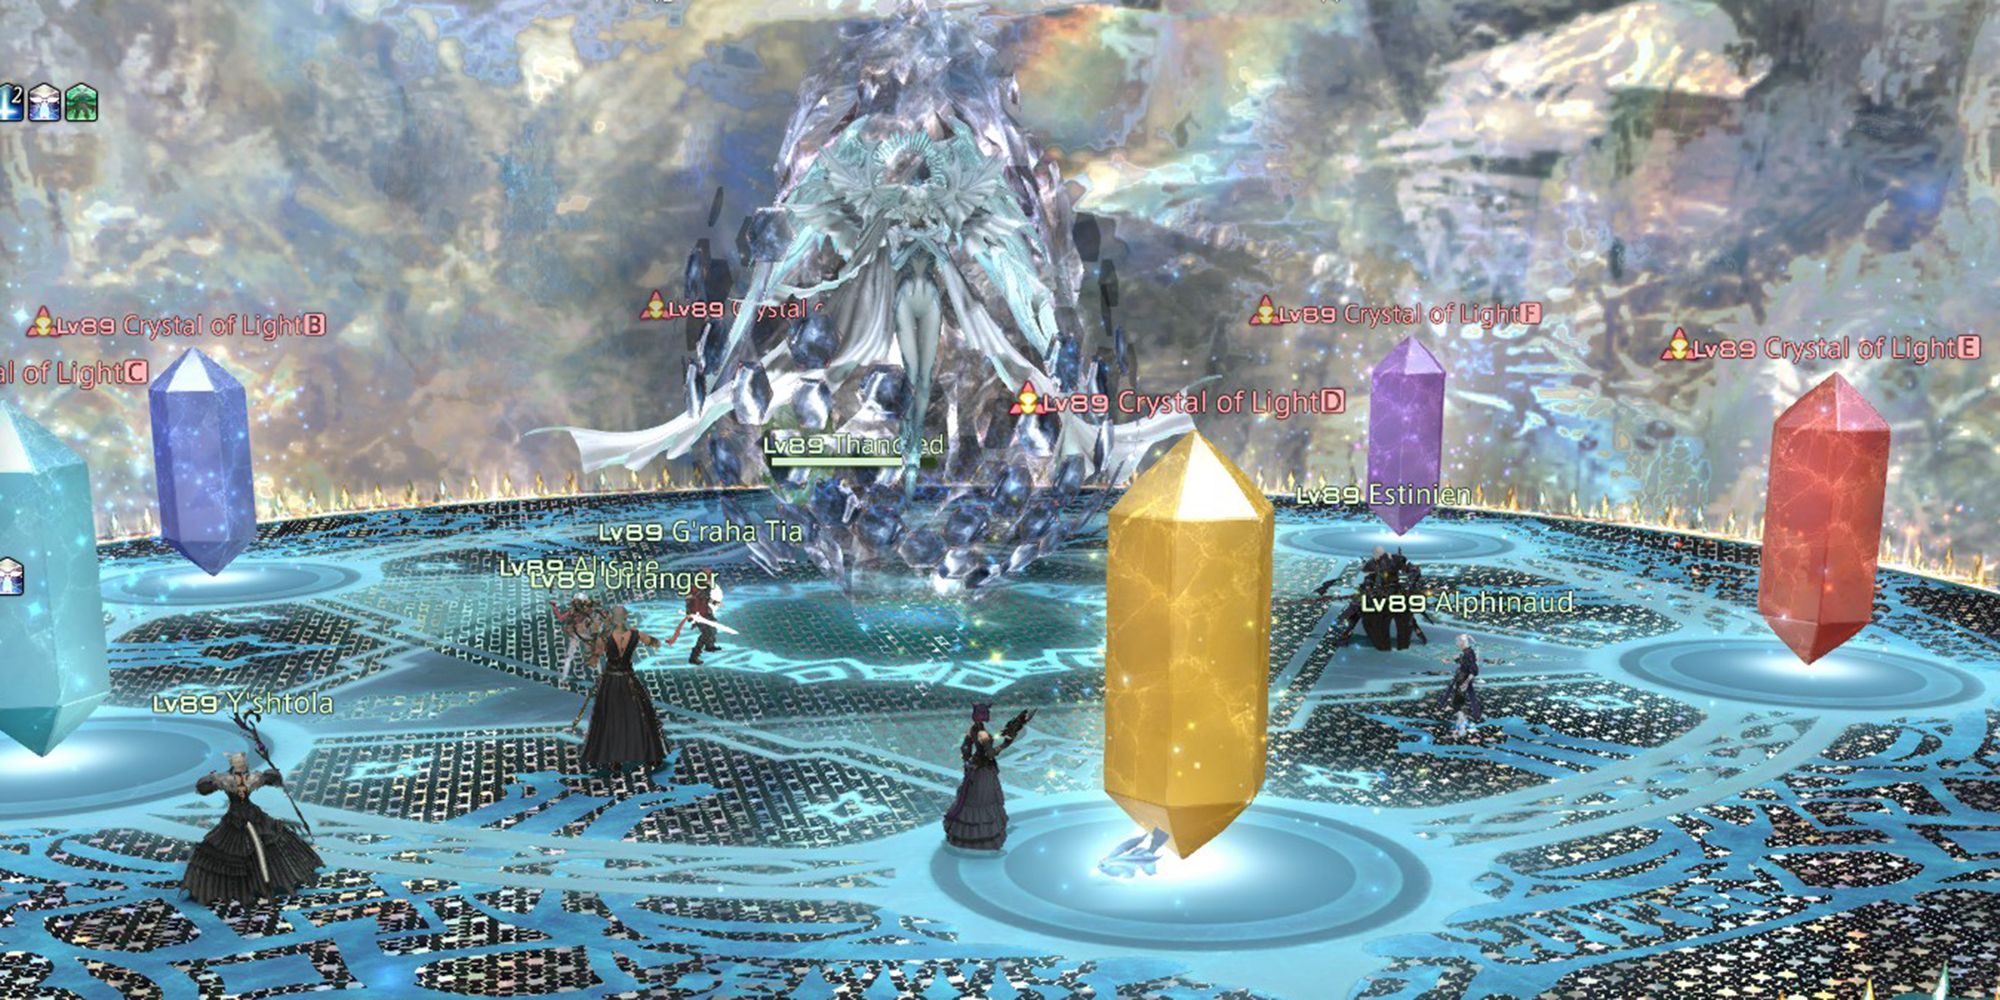 hydaelyn summoning crystals of light in the mothercrystal trial